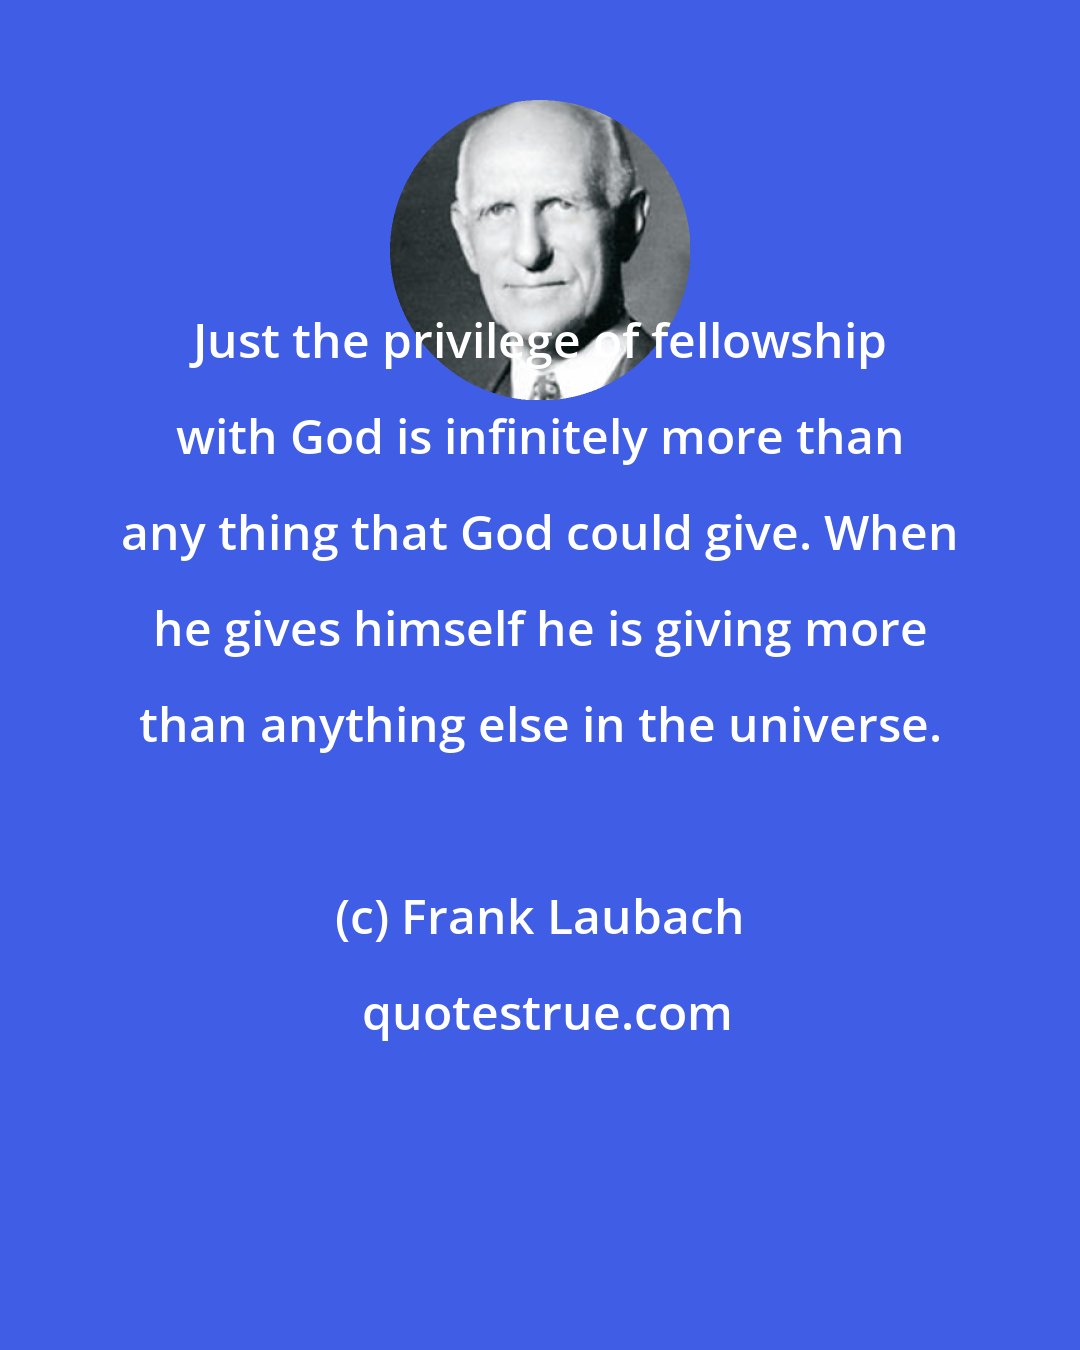 Frank Laubach: Just the privilege of fellowship with God is infinitely more than any thing that God could give. When he gives himself he is giving more than anything else in the universe.